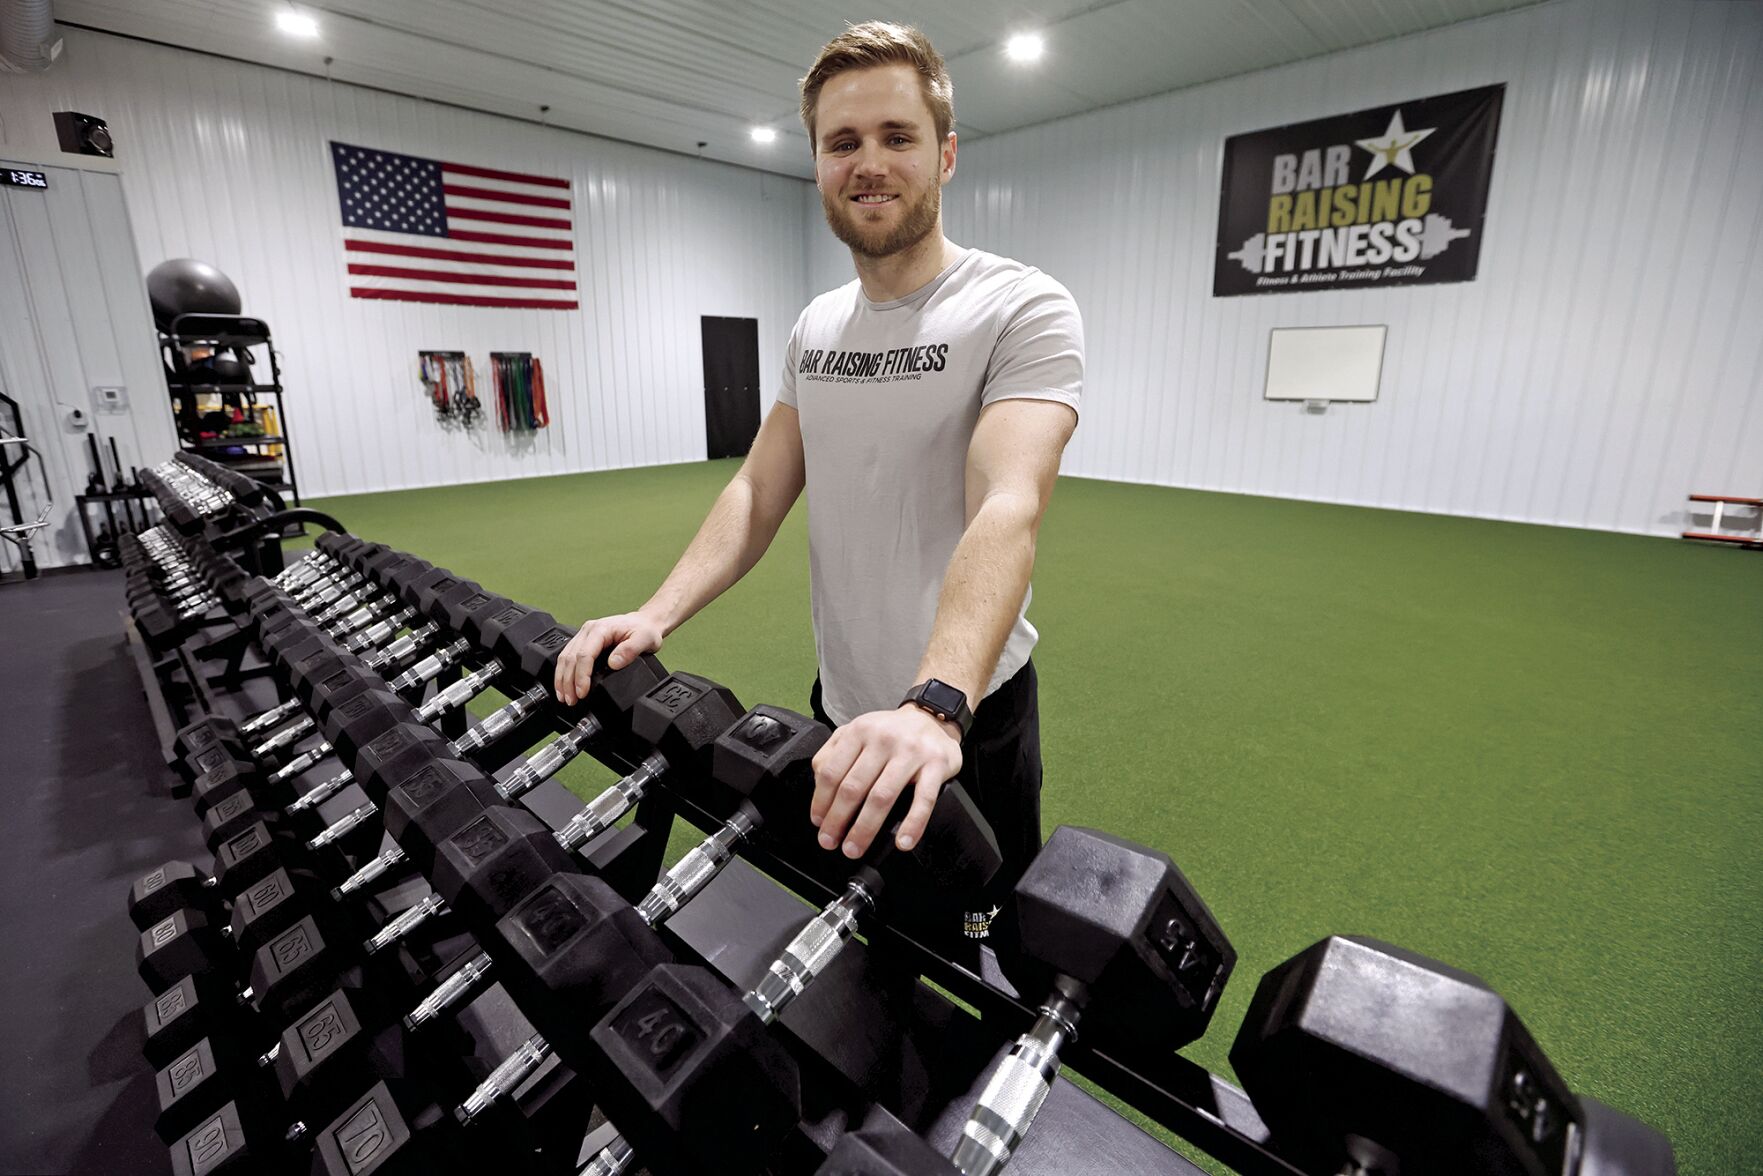 Brandon Hogan, owner of Bar Raising Fitness, recently opened a new location in Dubuque.    PHOTO CREDIT: JESSICA REILLY